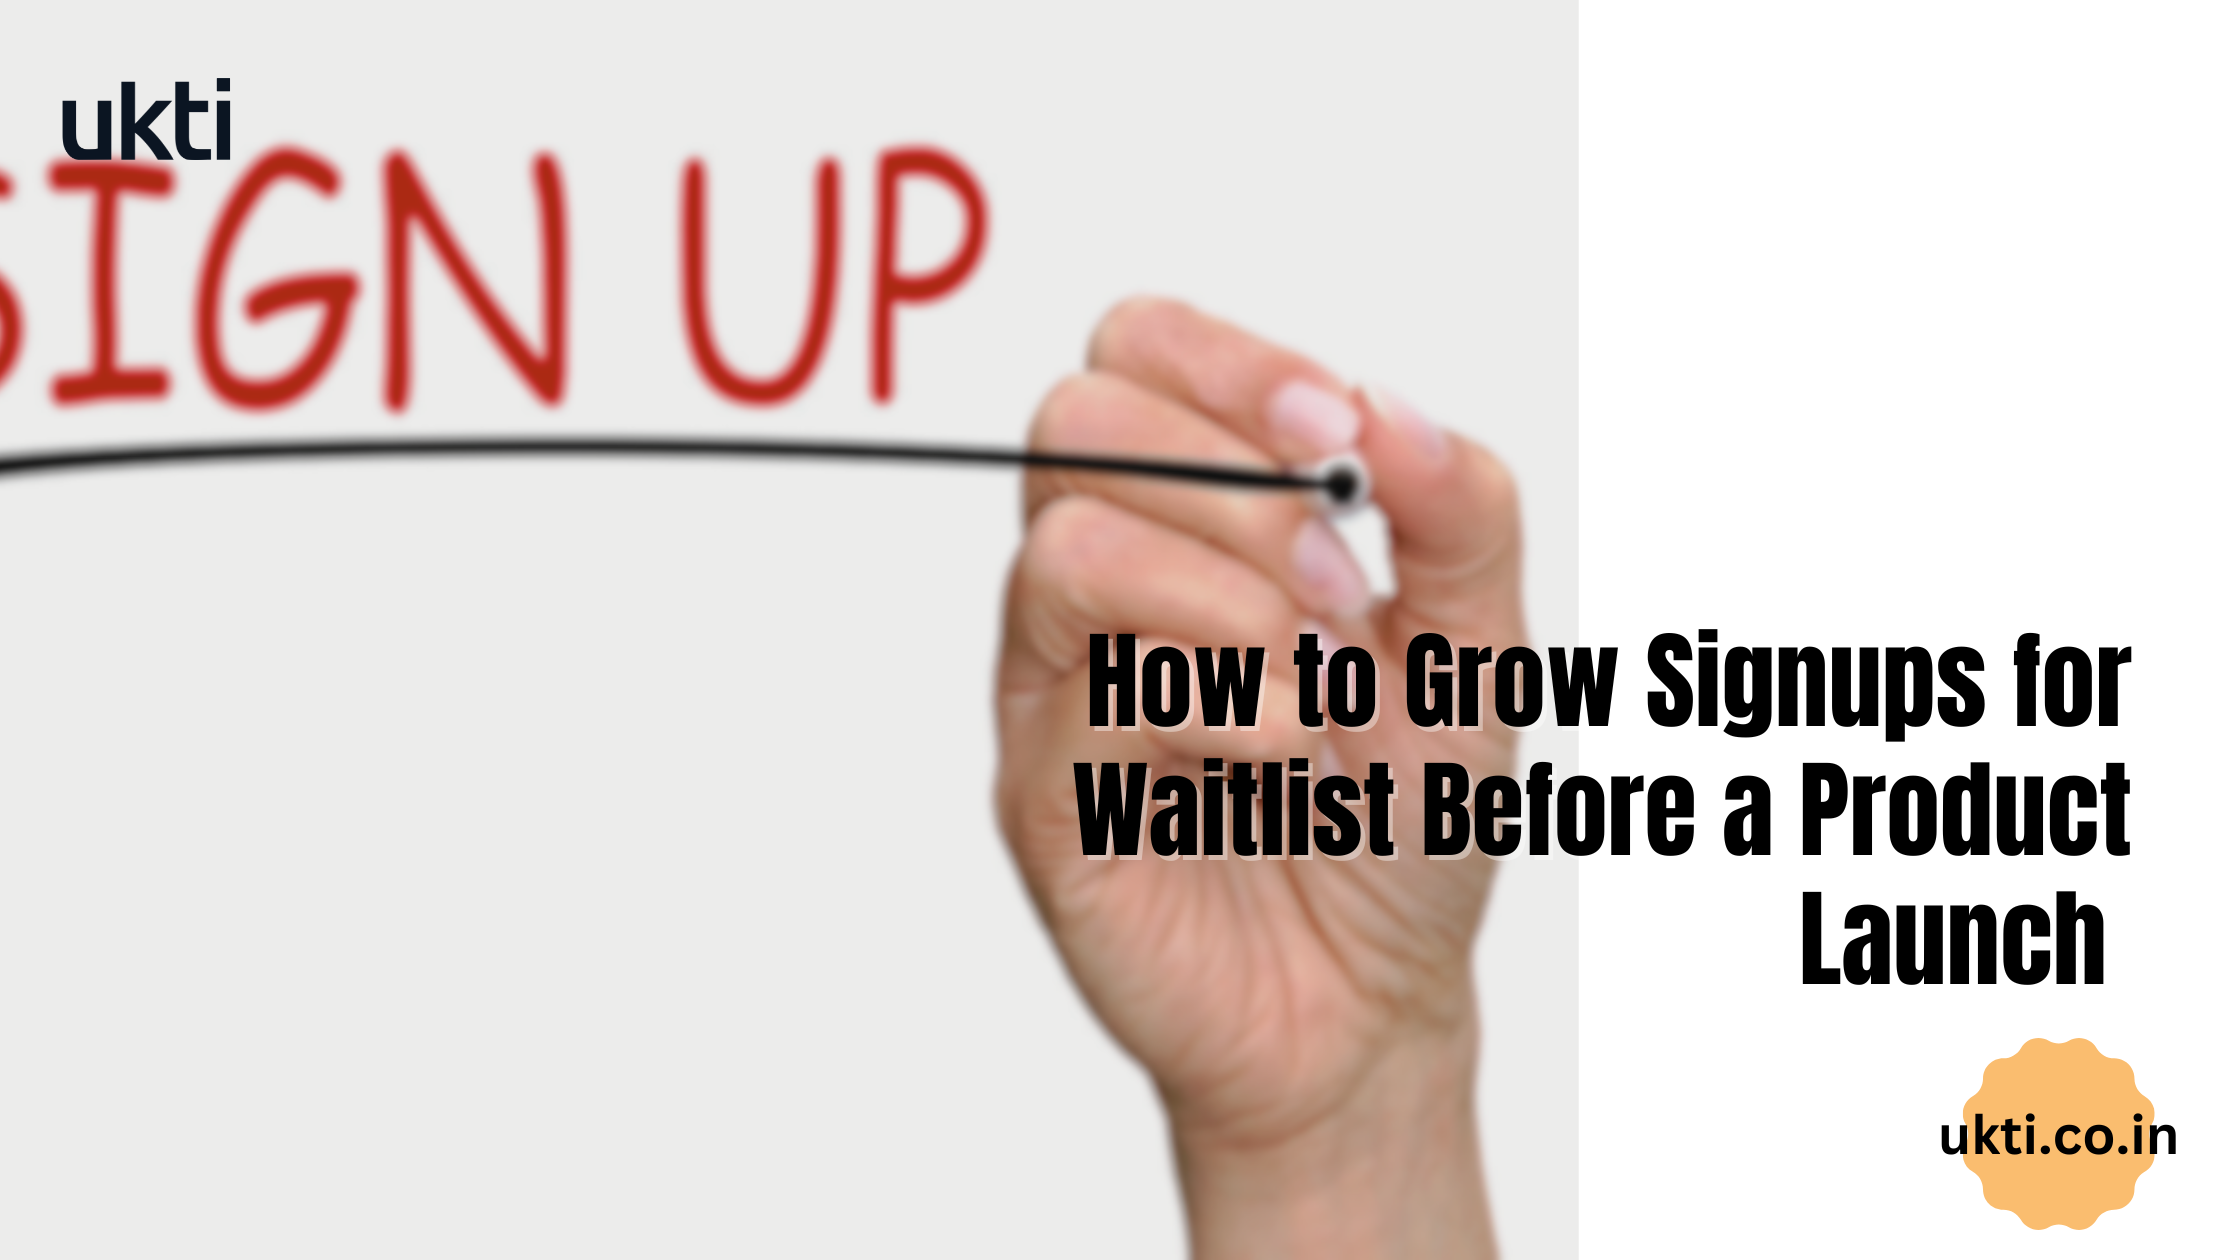 How to Grow a Product Launch Waitlist Using Content?